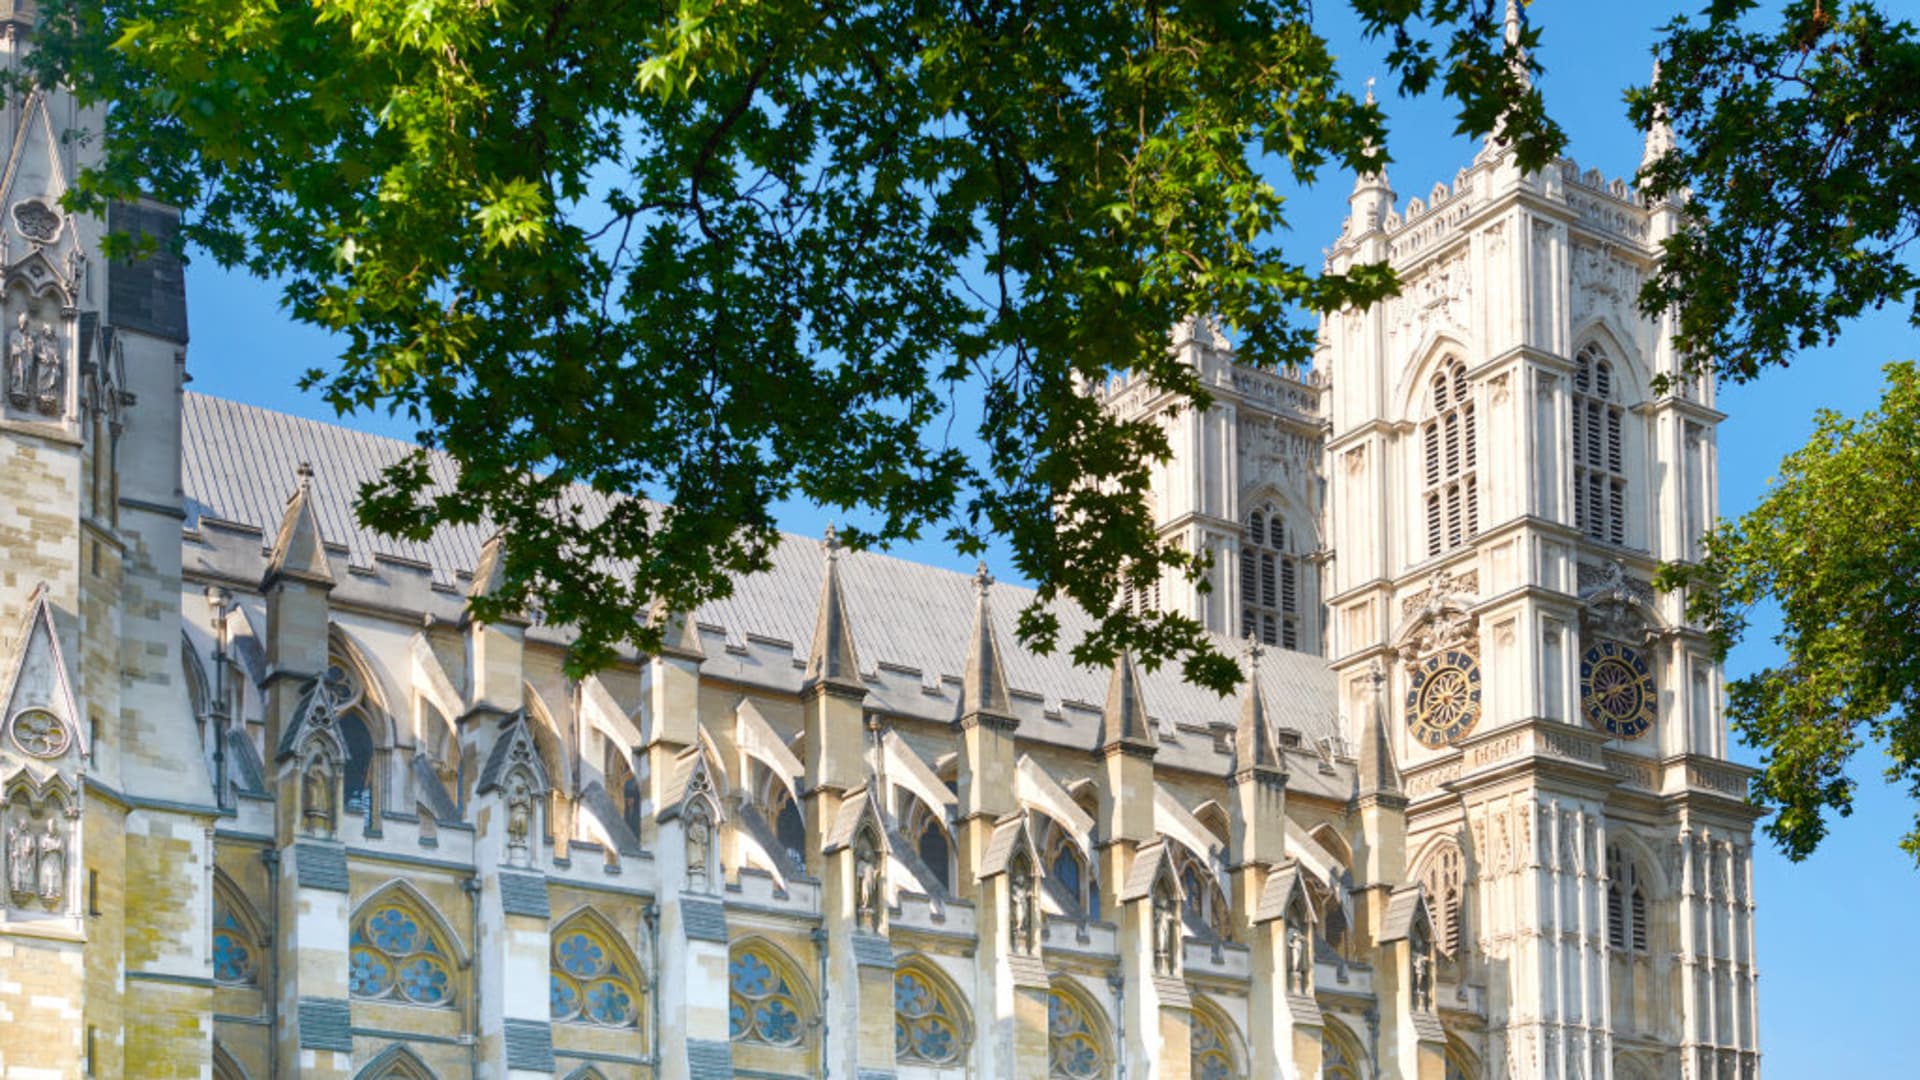 London's Westminster Abbey will play host to King Charles III's coronation on May 6, 2023.